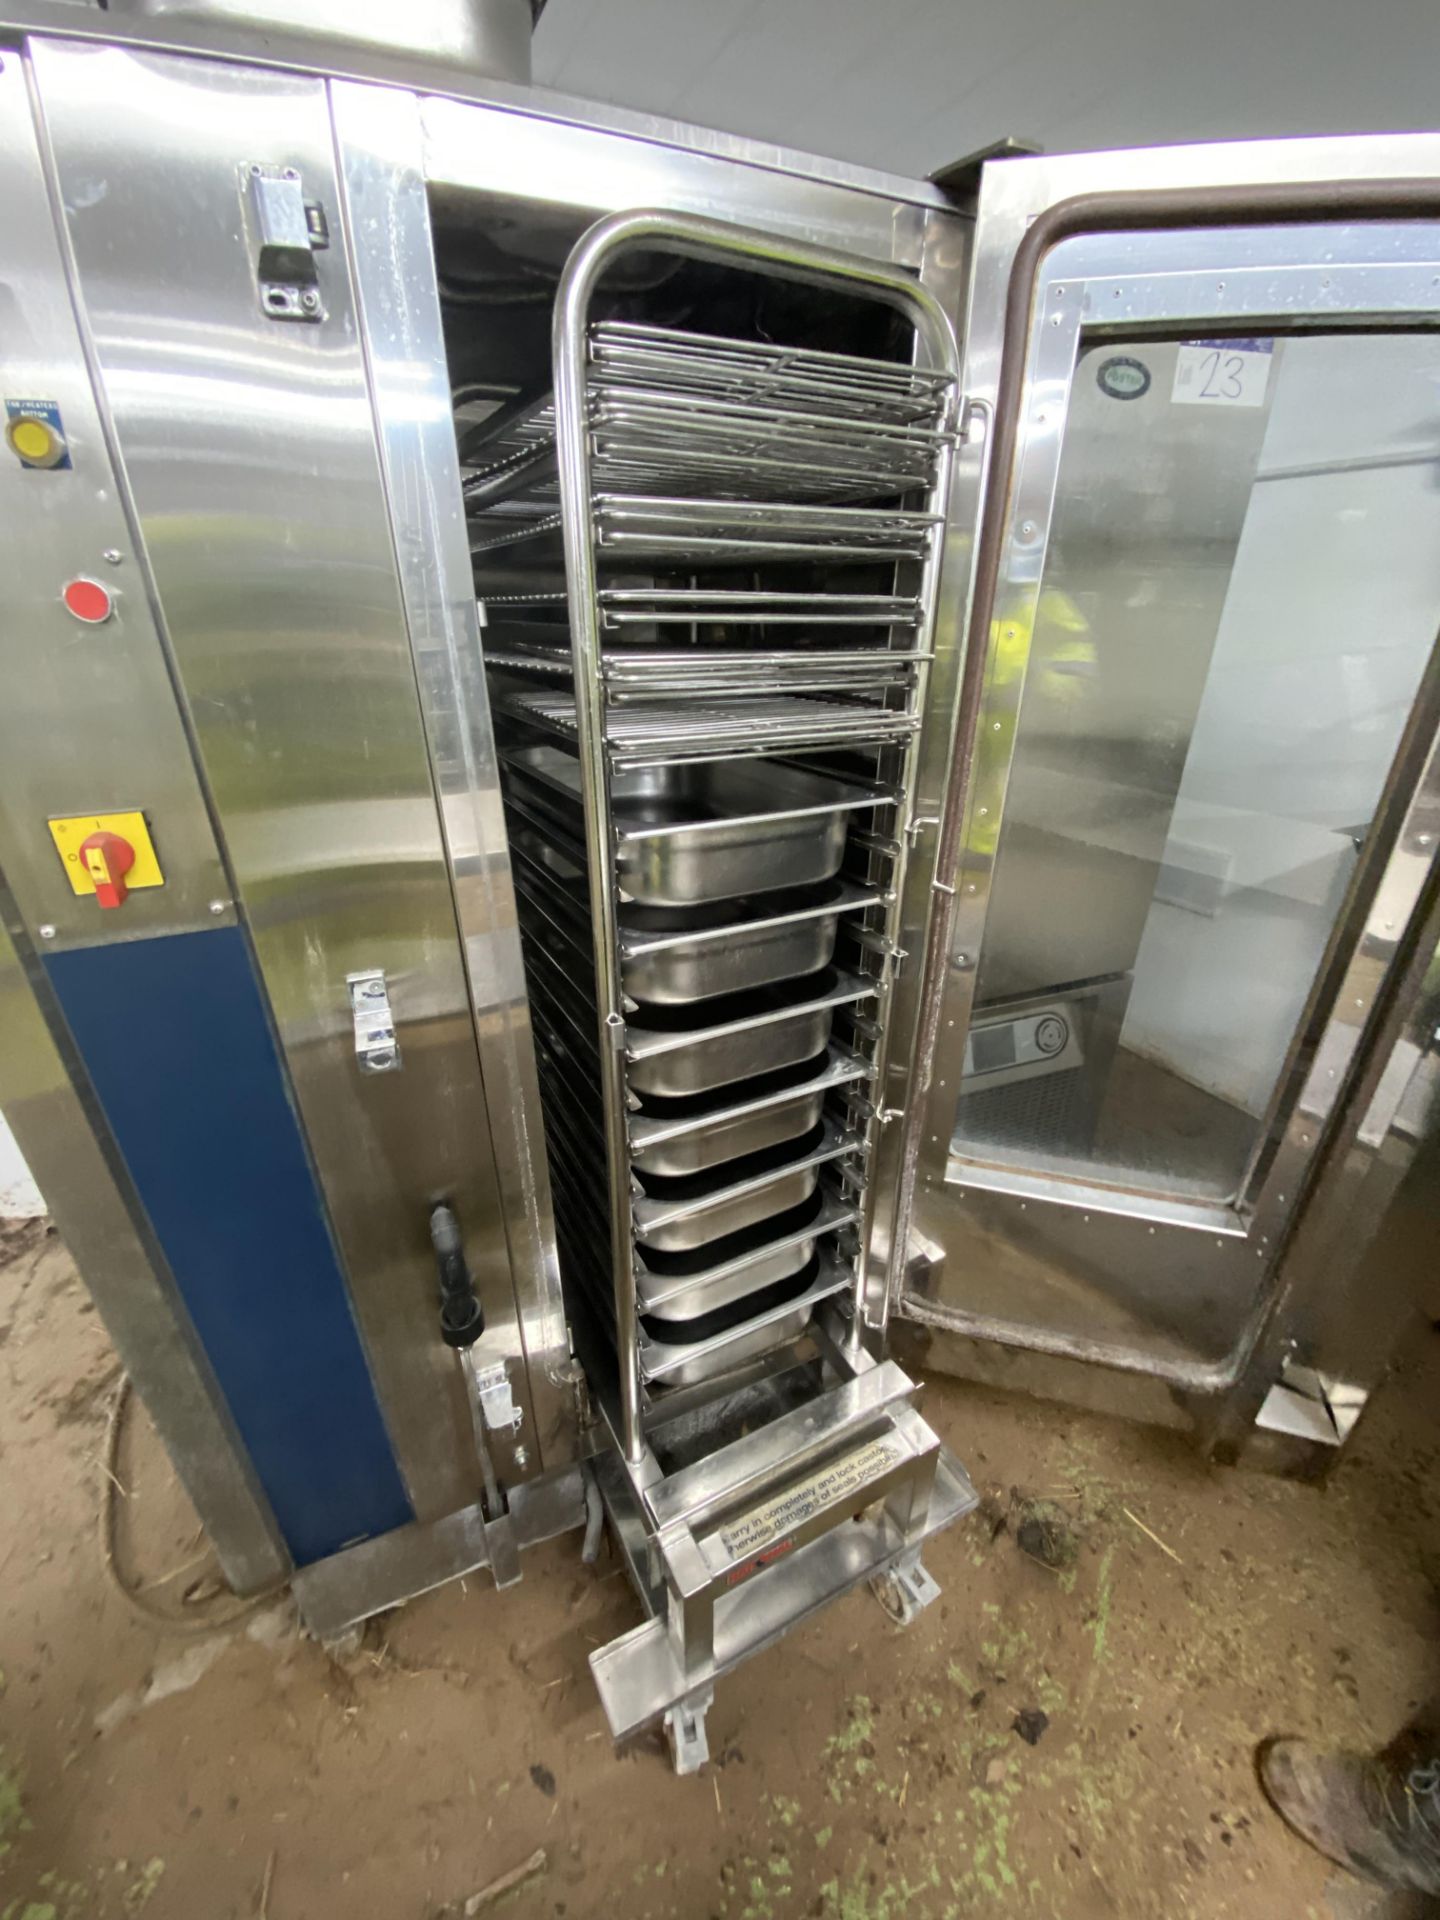 Rational CD201 CLOTTED CREAM HEATER/ OVEN, with multi-tray mobile rack, serial no. 20192031103, with - Image 5 of 7